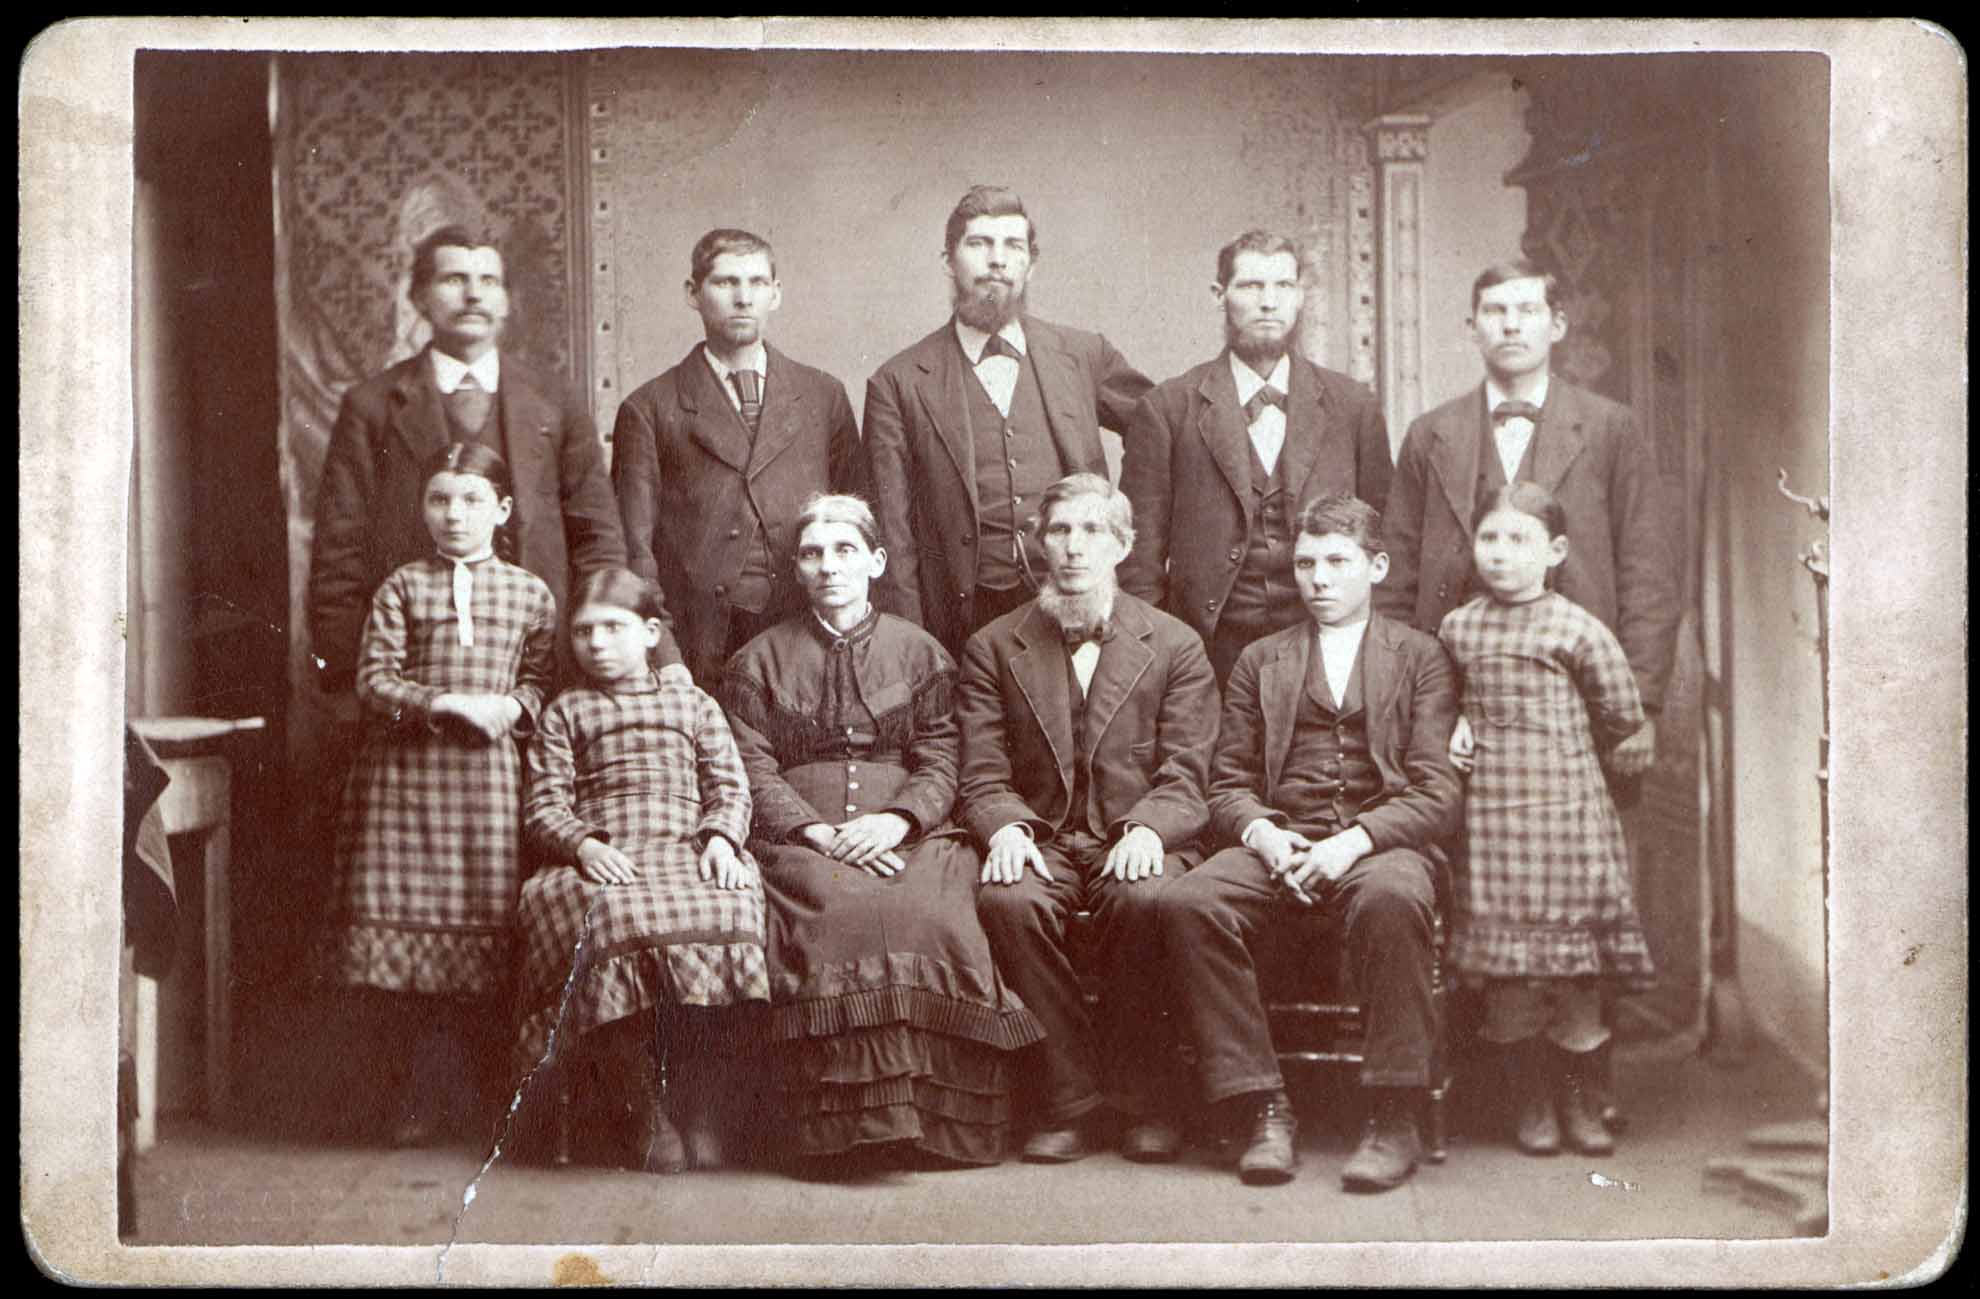 family portrait from late 1800's